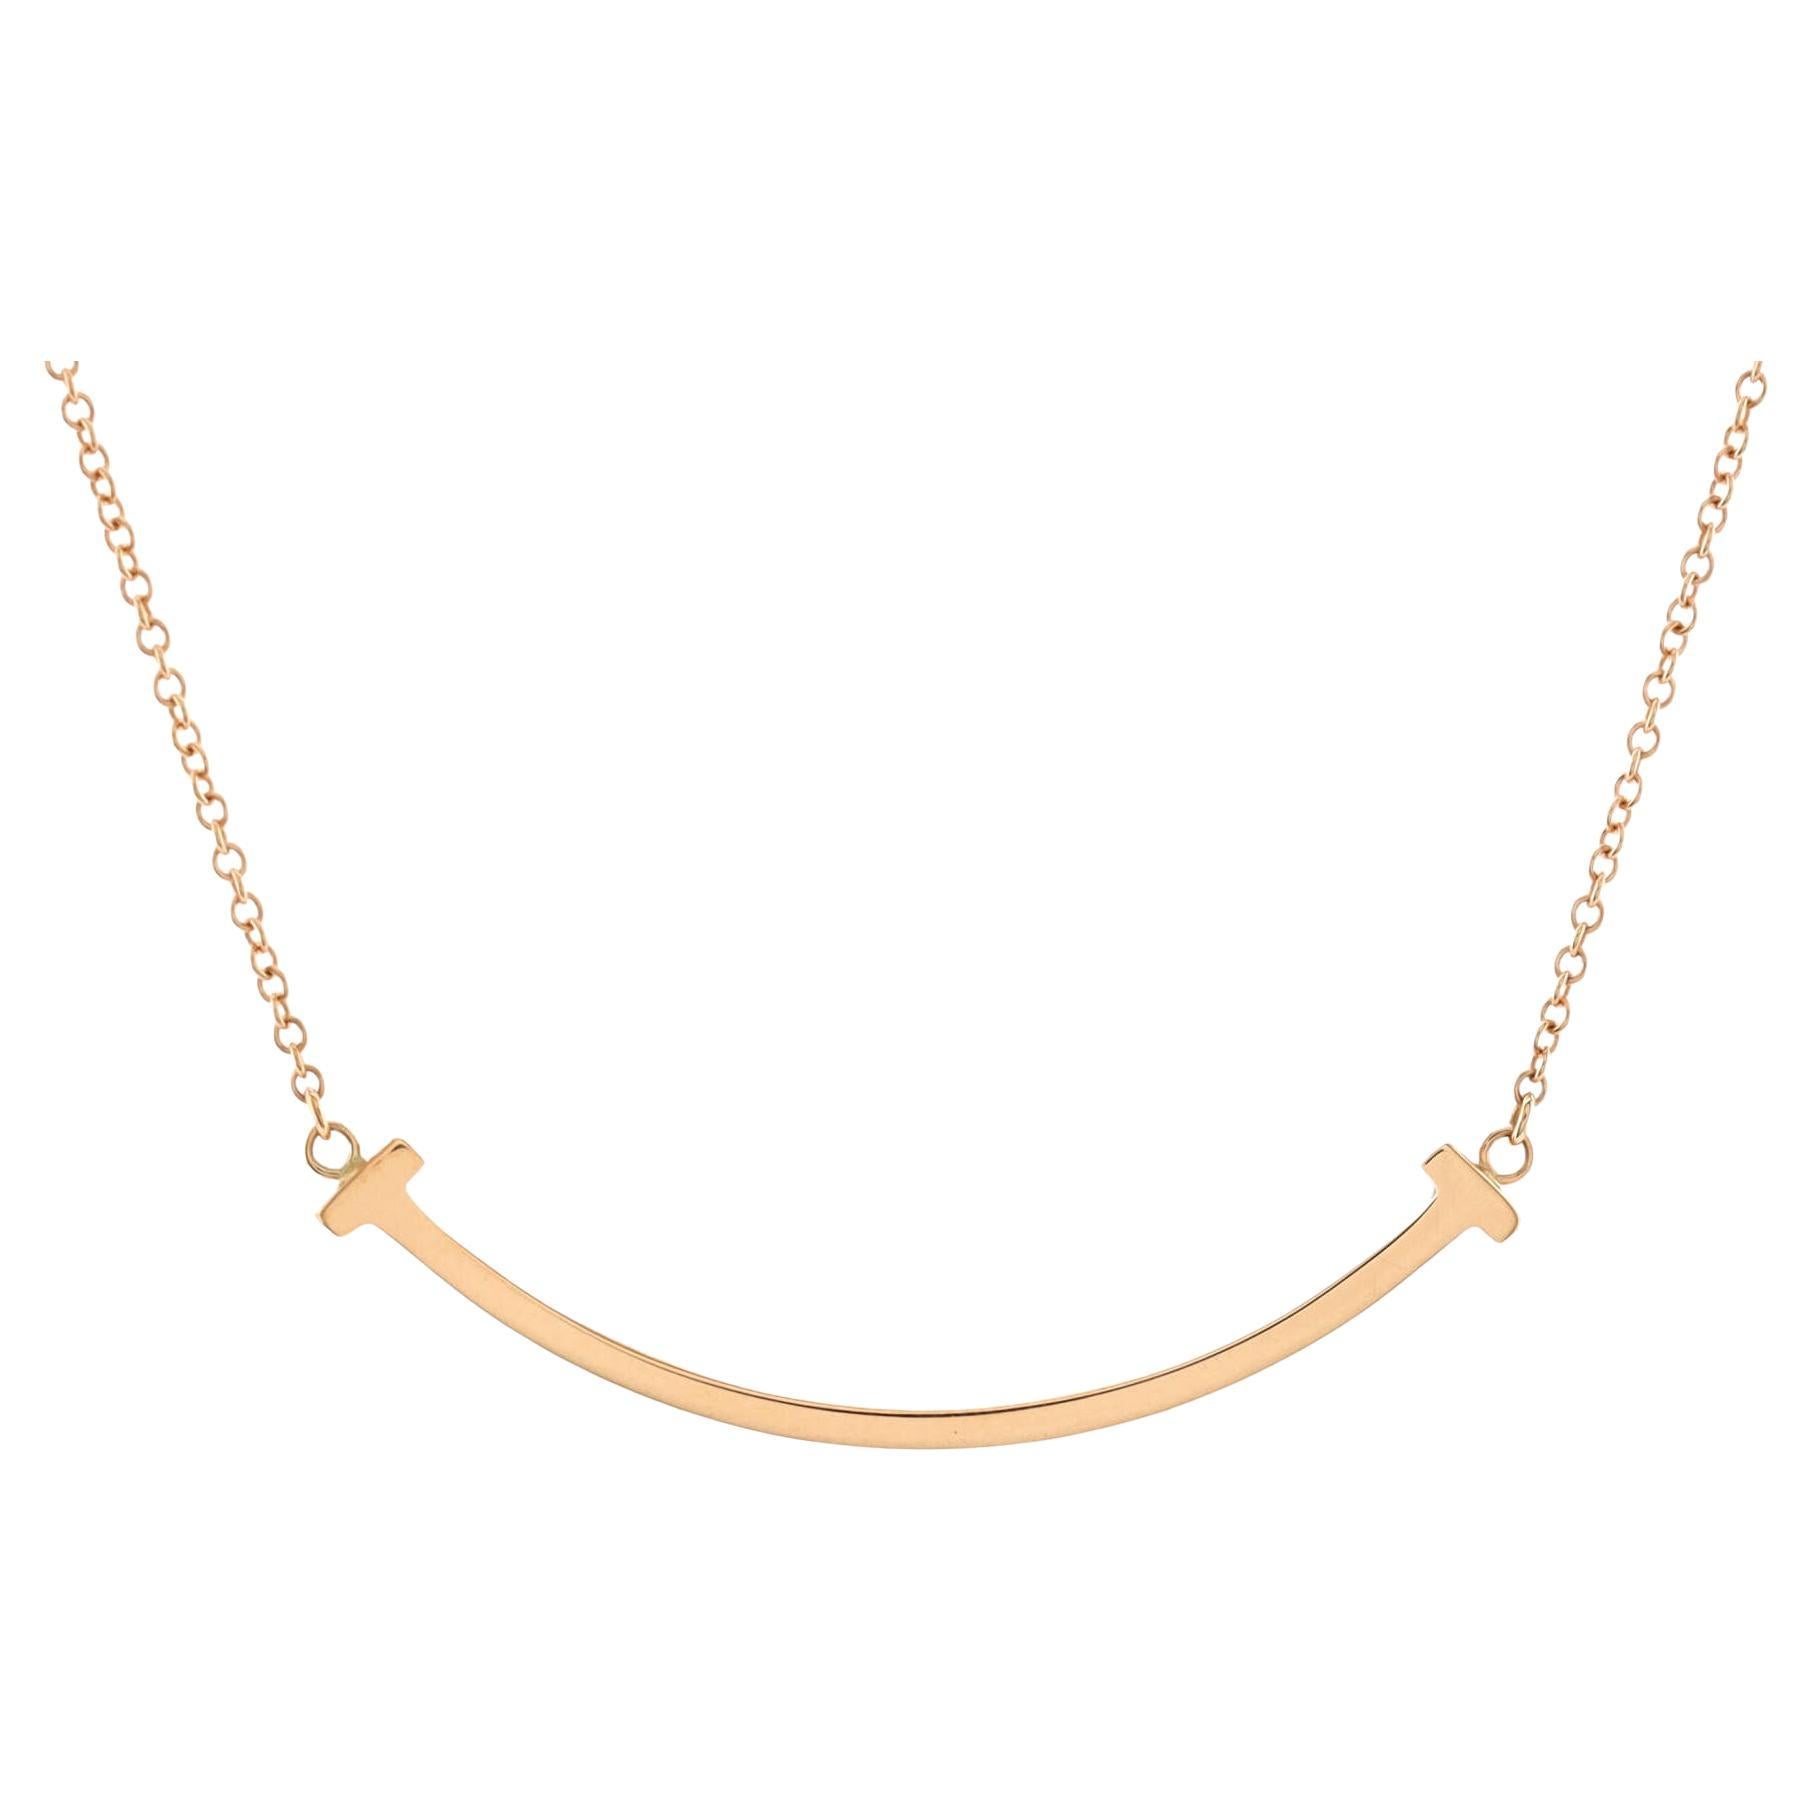 Tiffany T Smile Pendant in Yellow Gold with Diamonds, Small | Tiffany & Co.  Singapore